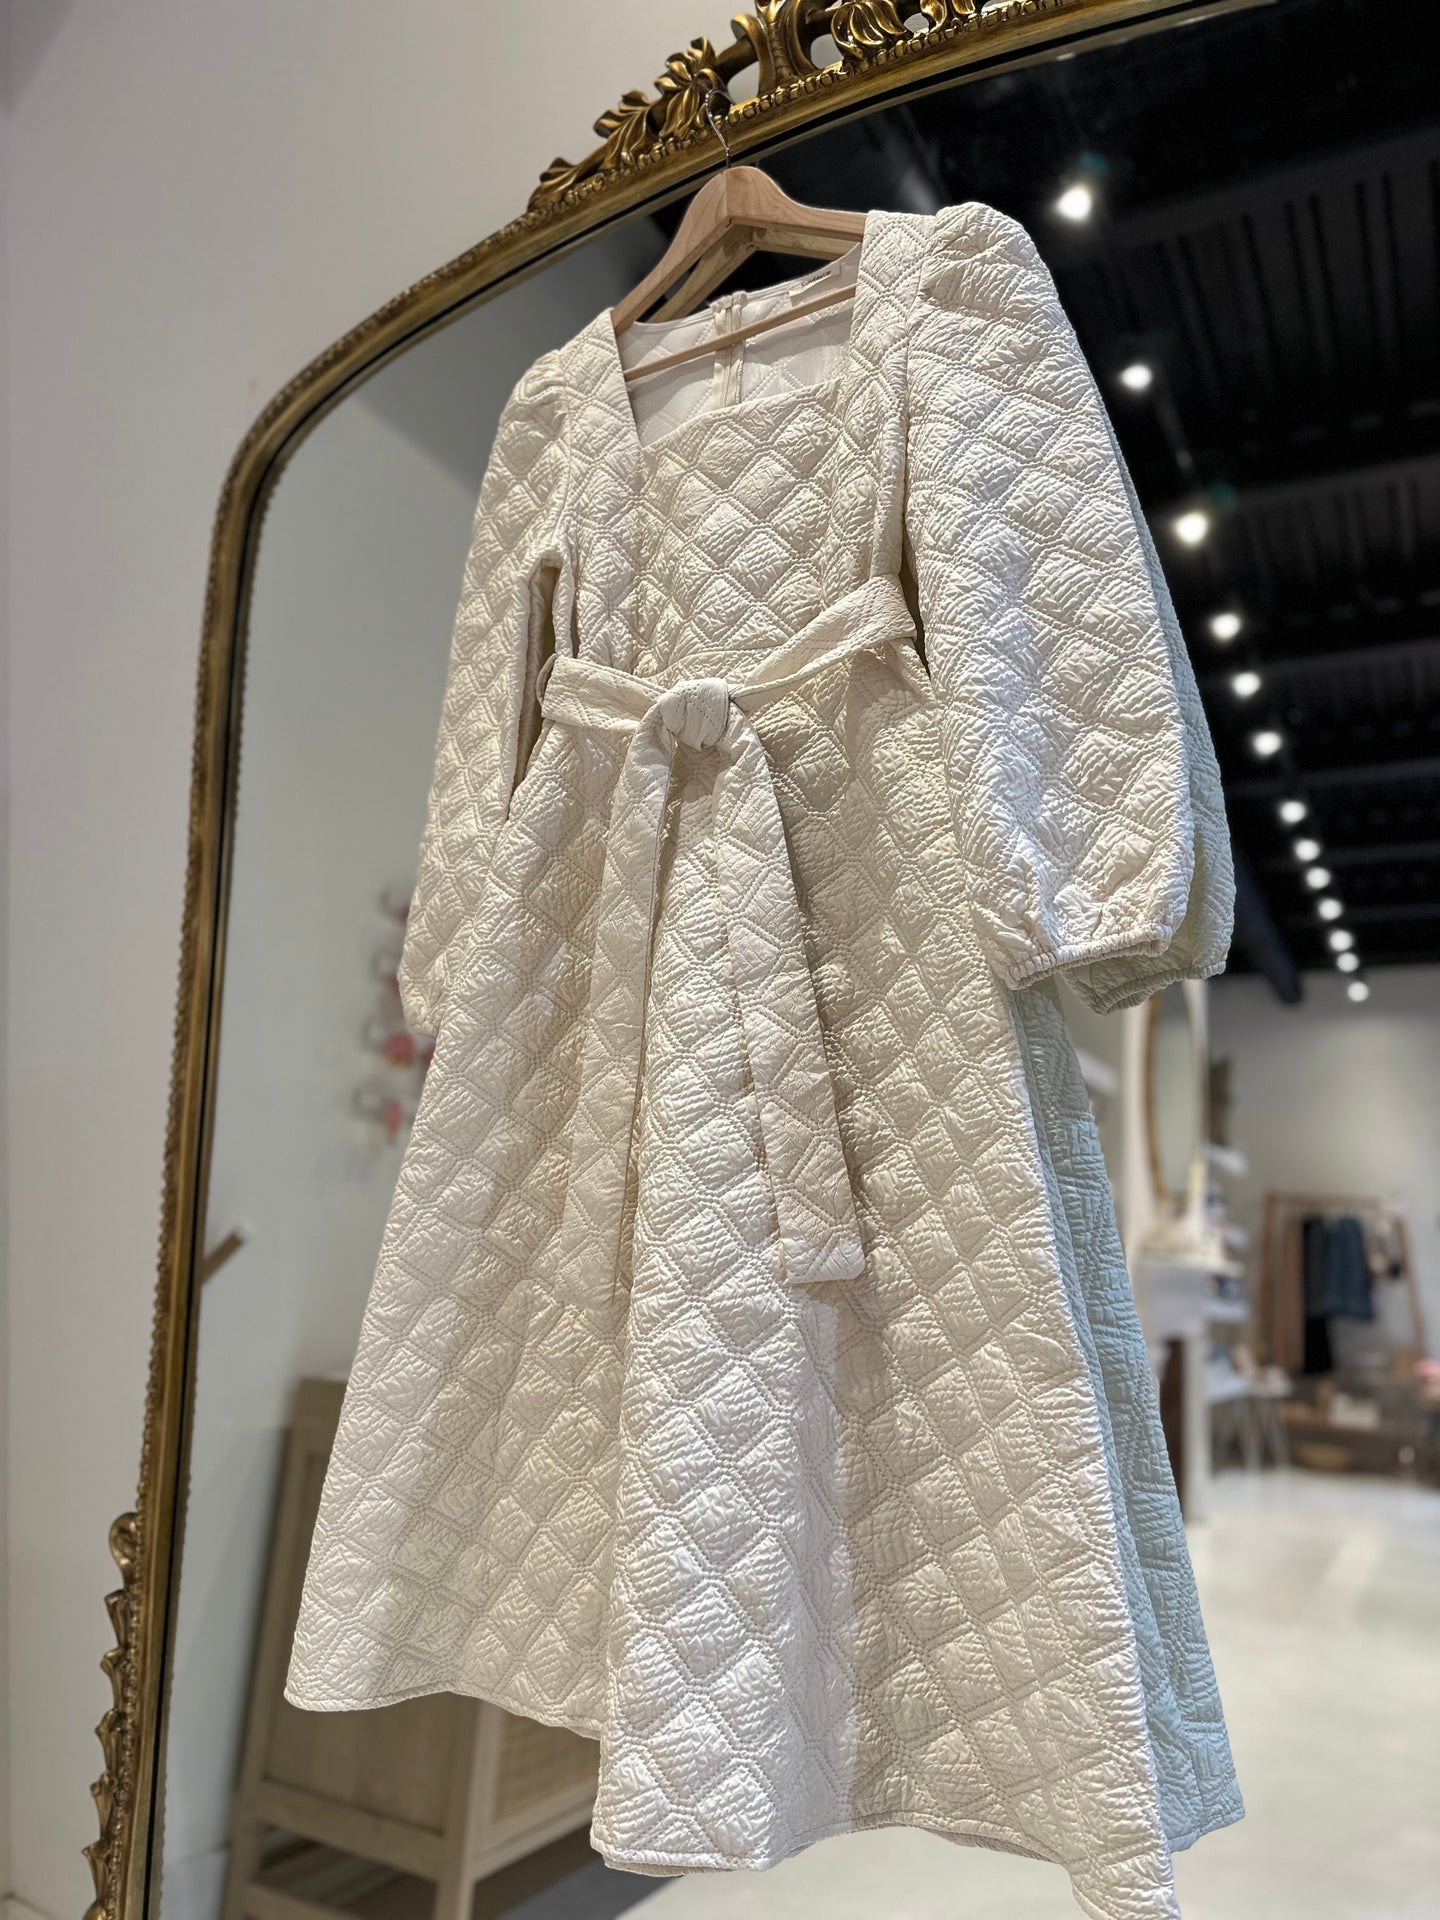 The Magnolia Quilted Dress